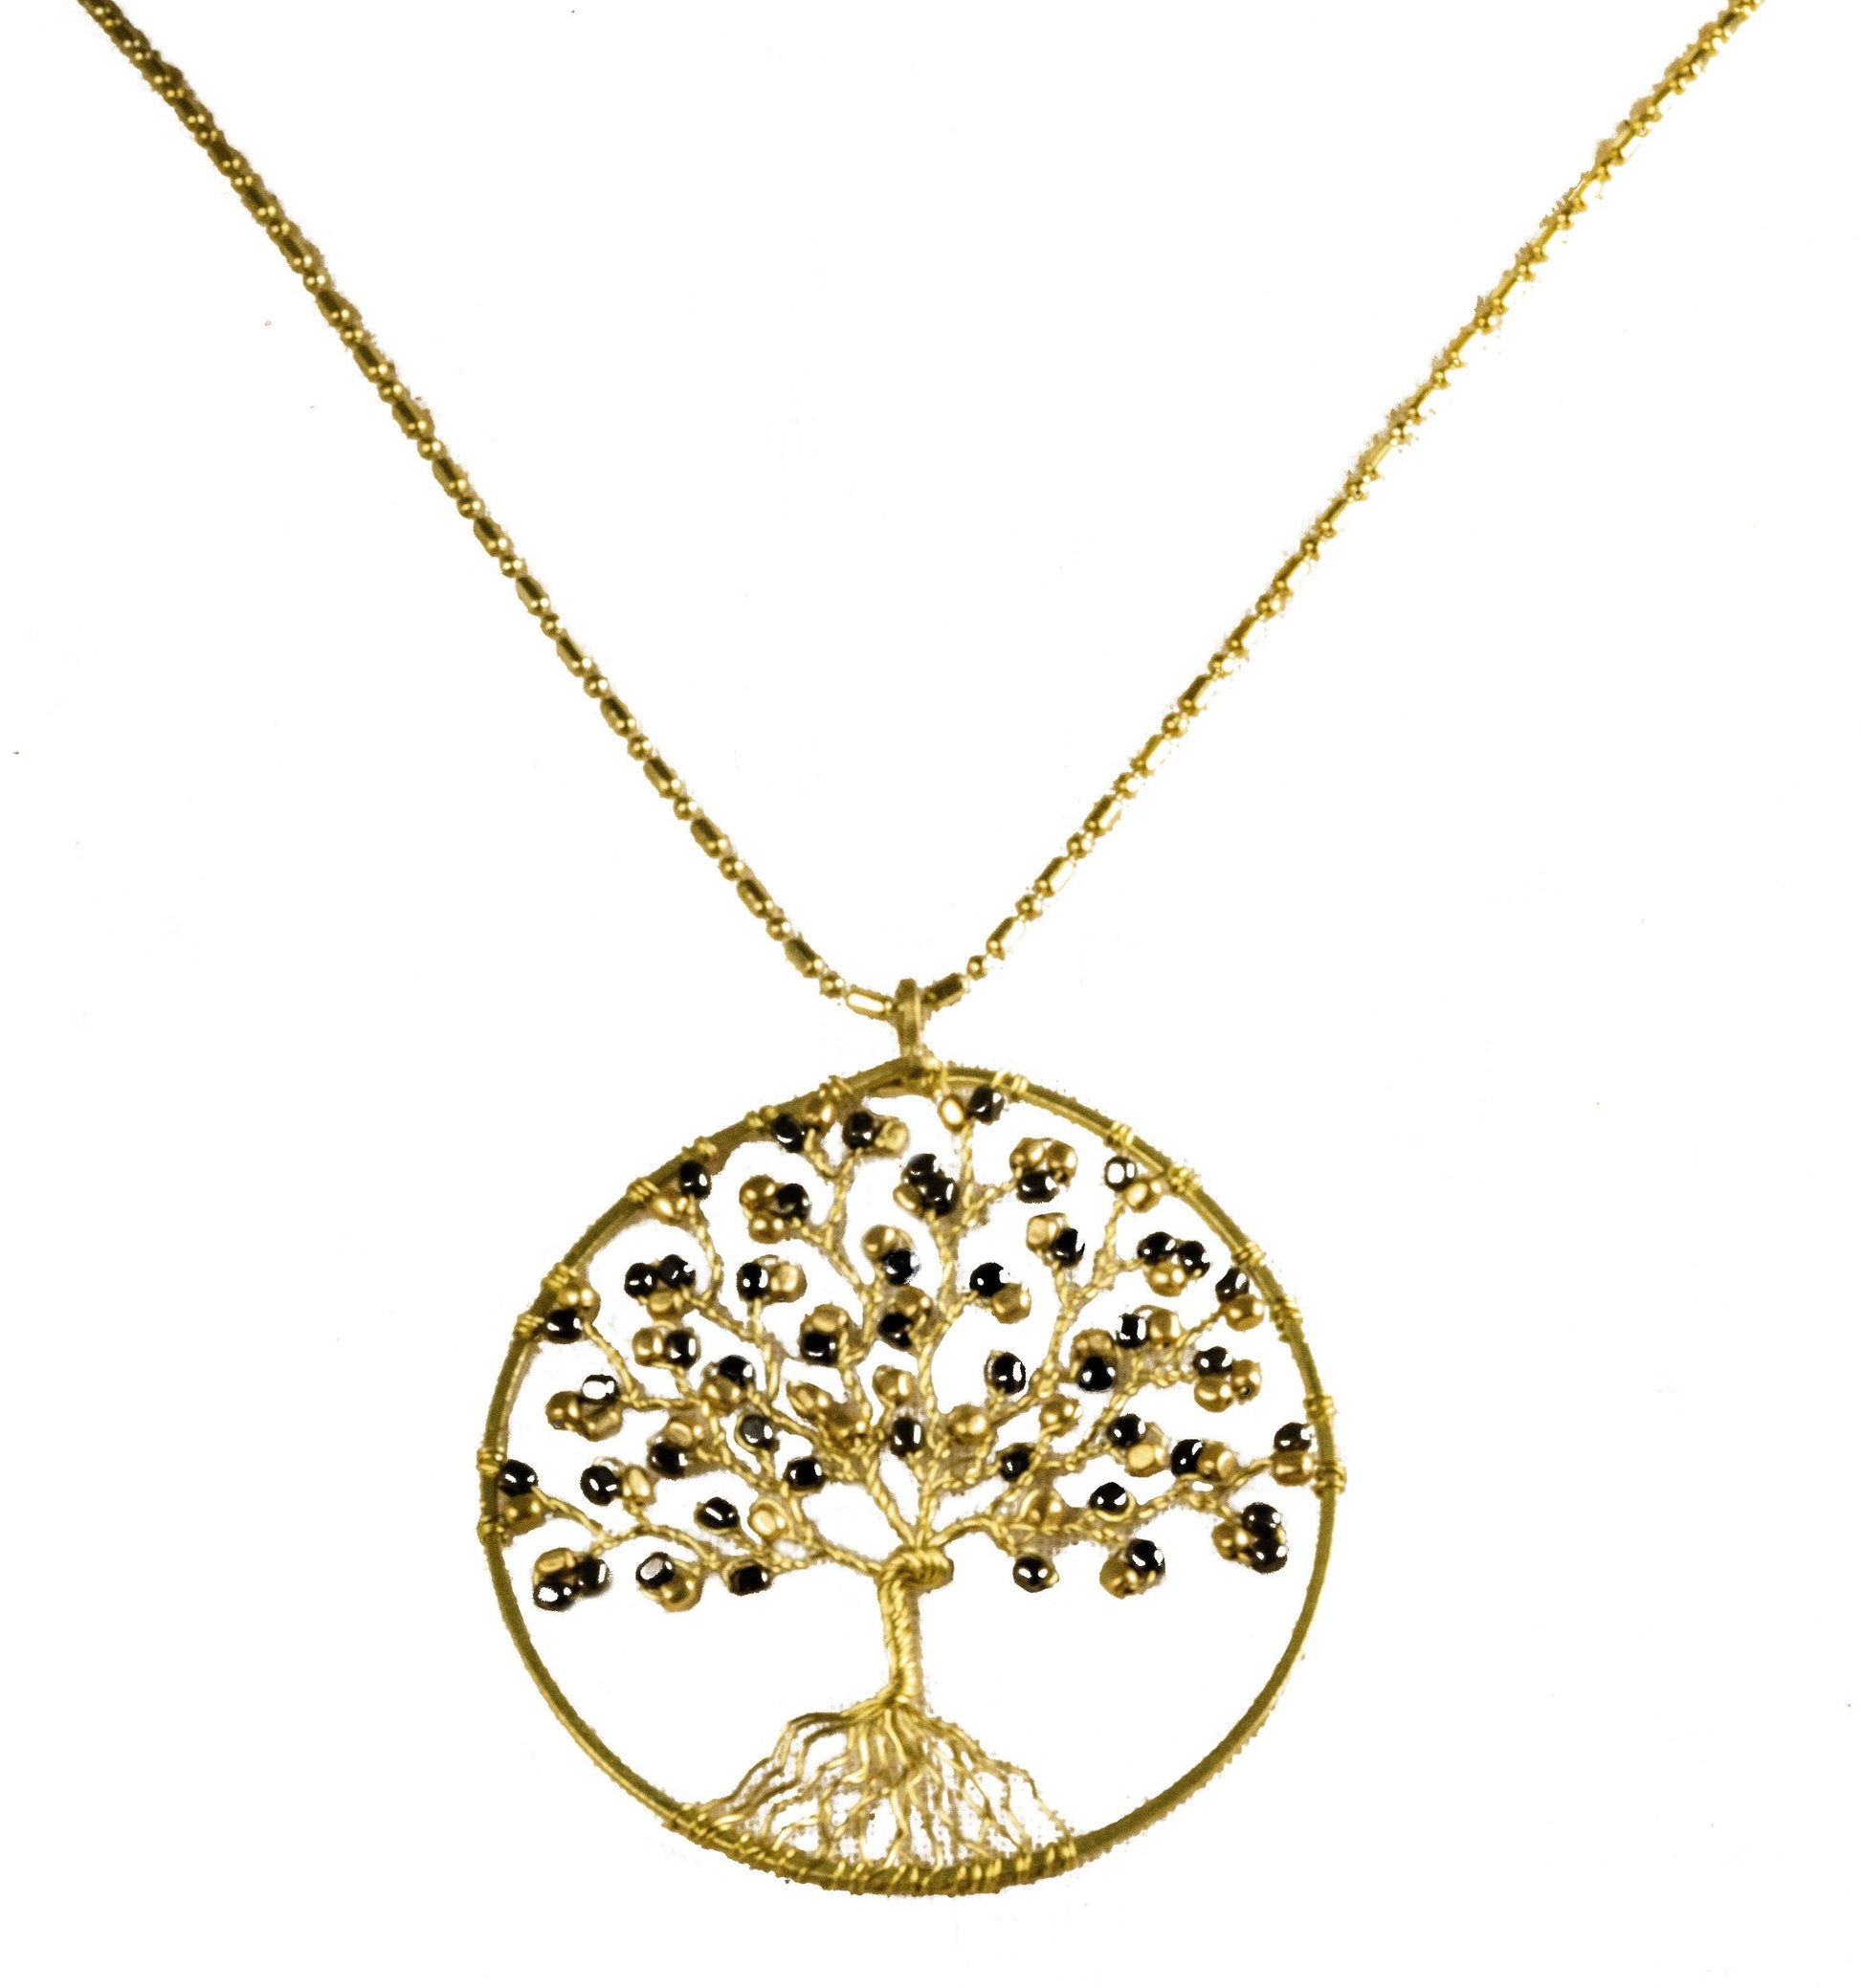 Handmade Necklace Tree of Life Brass with Bead, Crystal and Stone - CCCollections